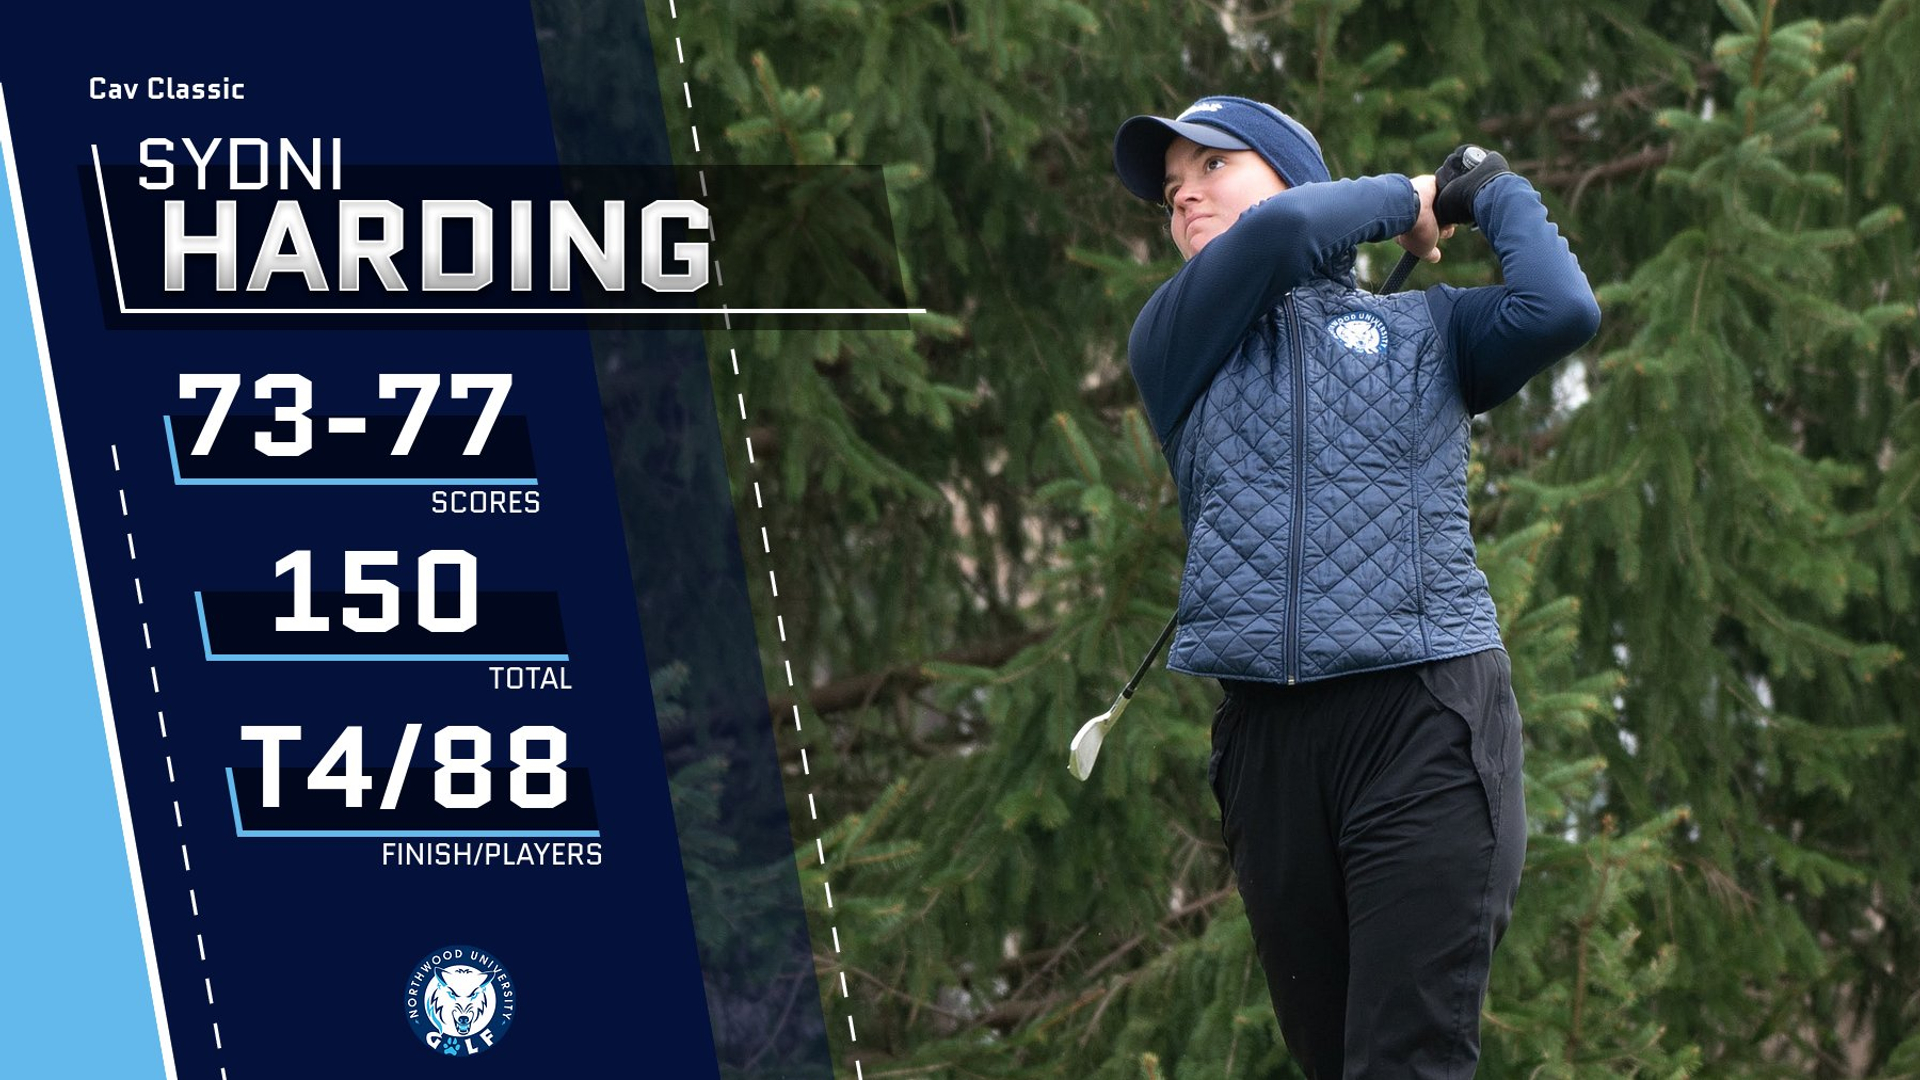 Women's Golf Finishes Fifth At Cav Classic